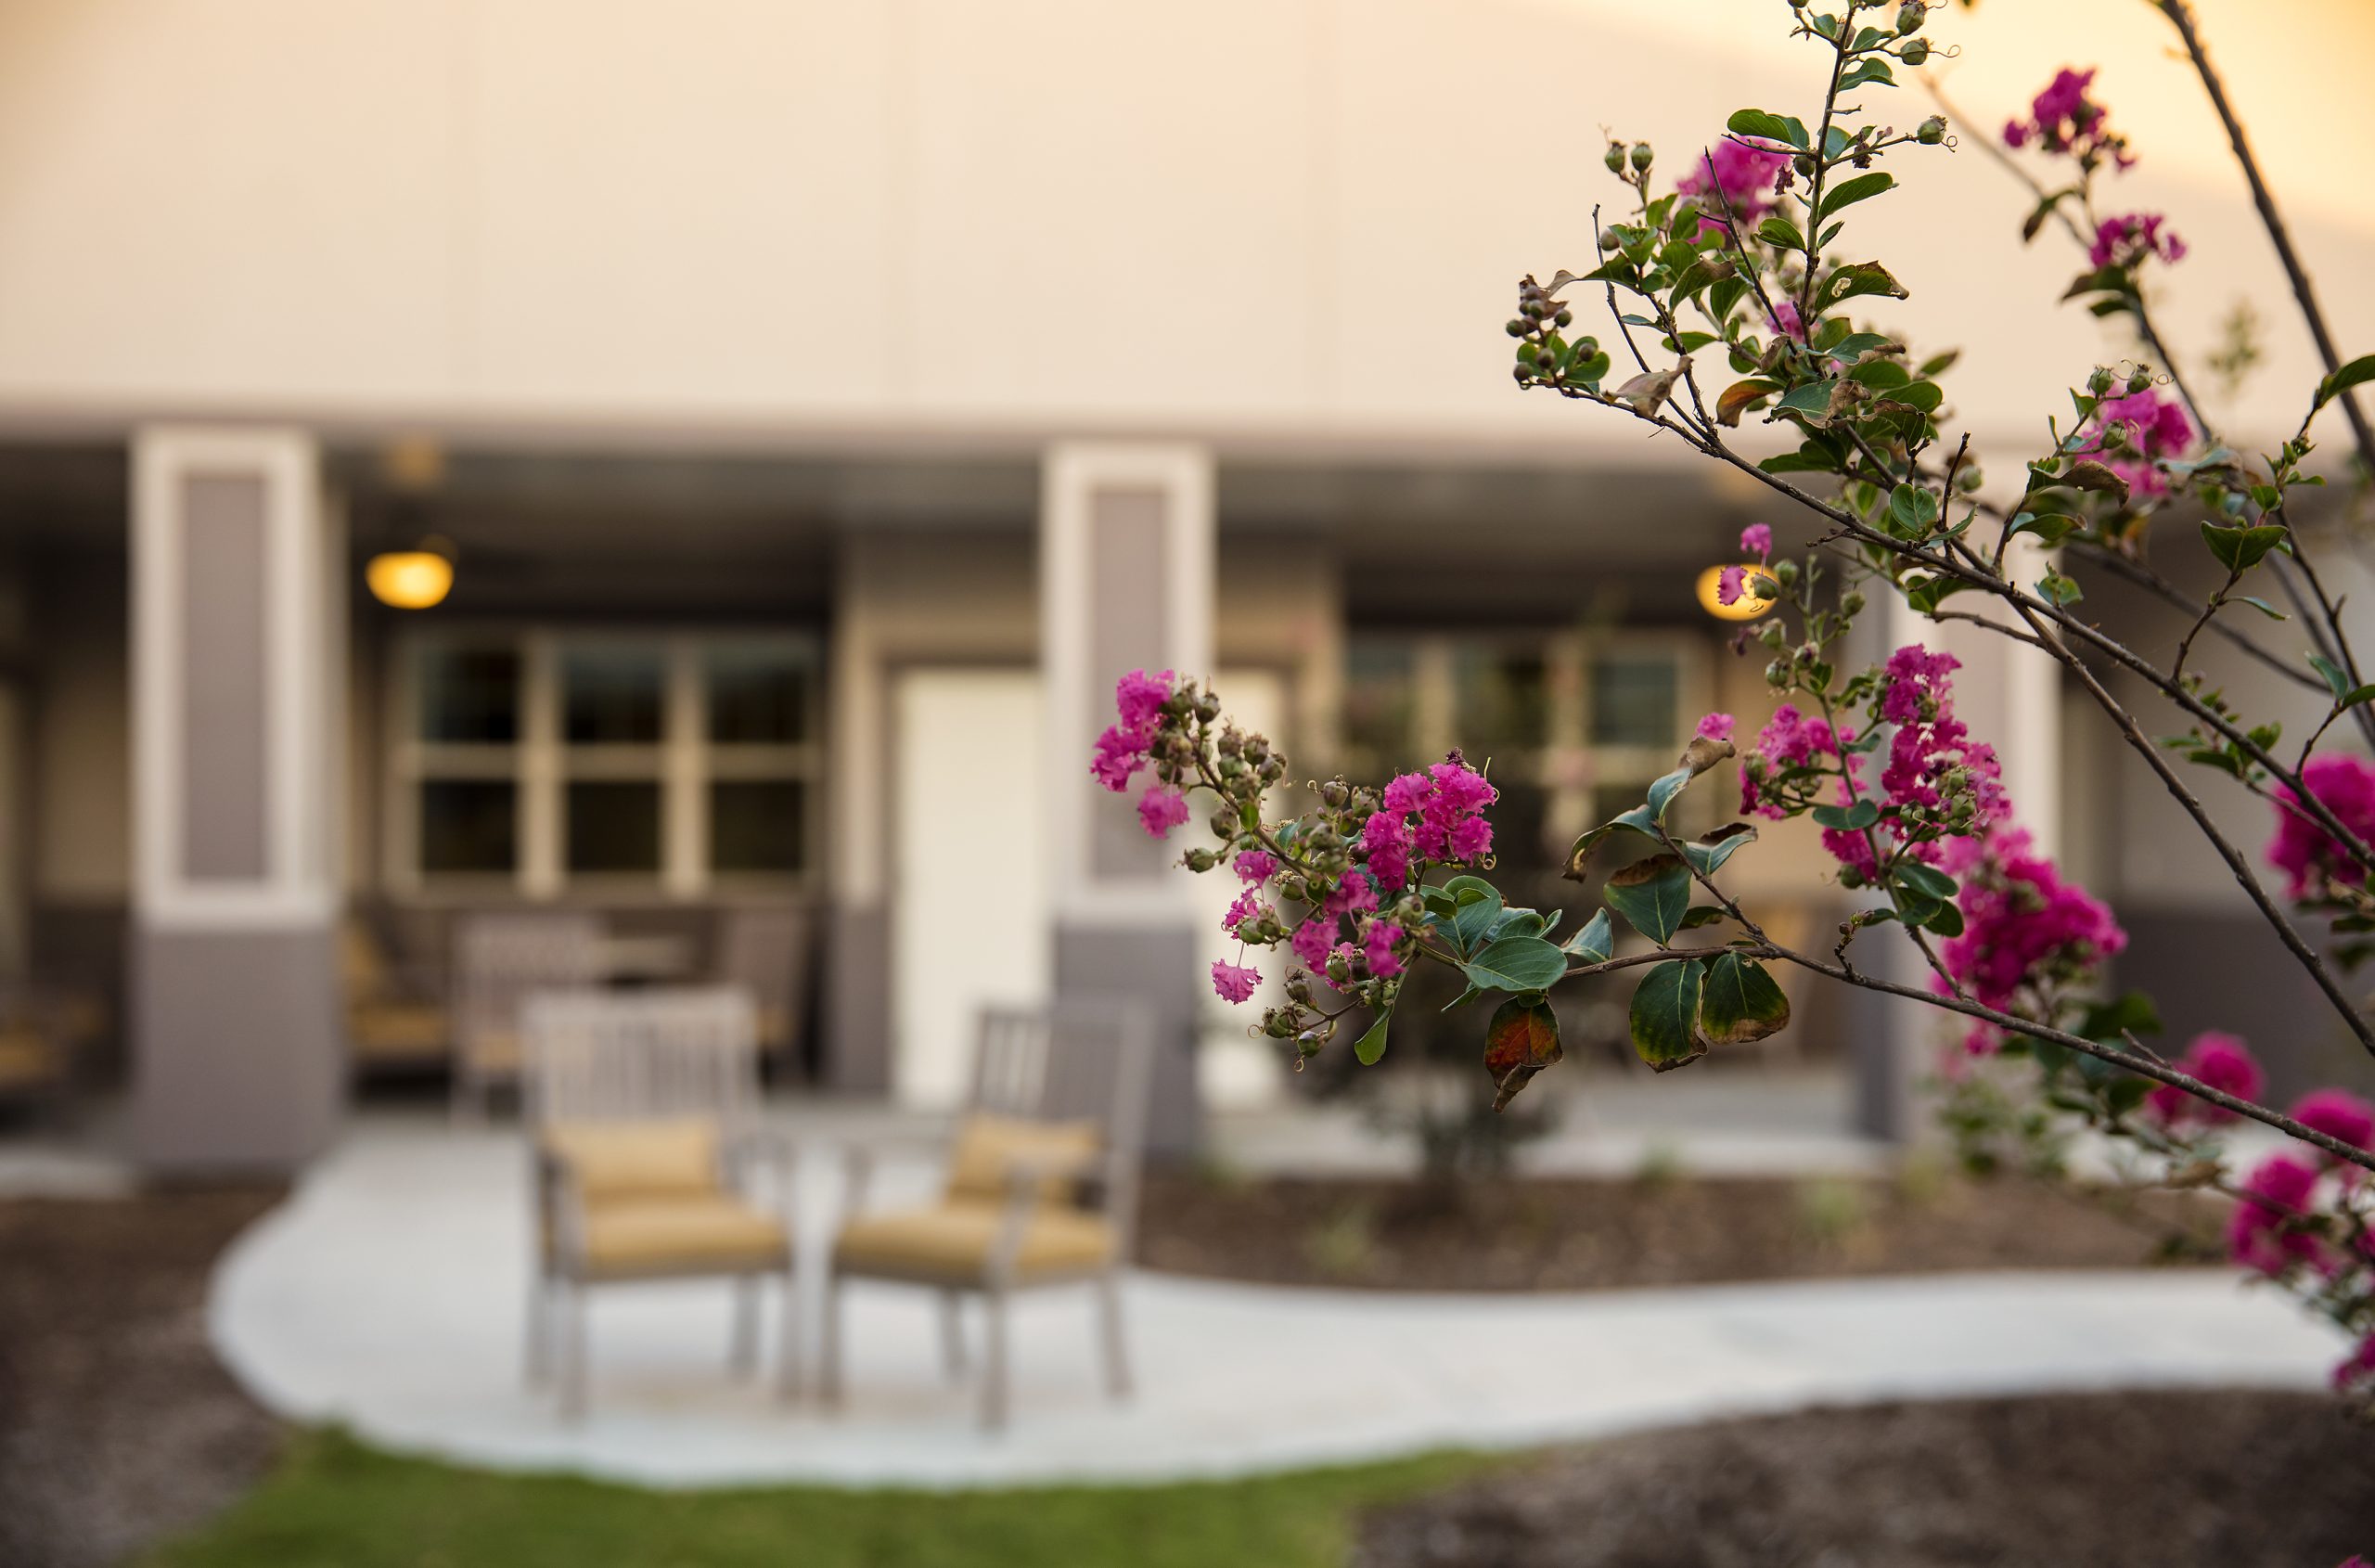 In focus a bush with pink flowers, and out of focus is a courtyard with outdoor furniture